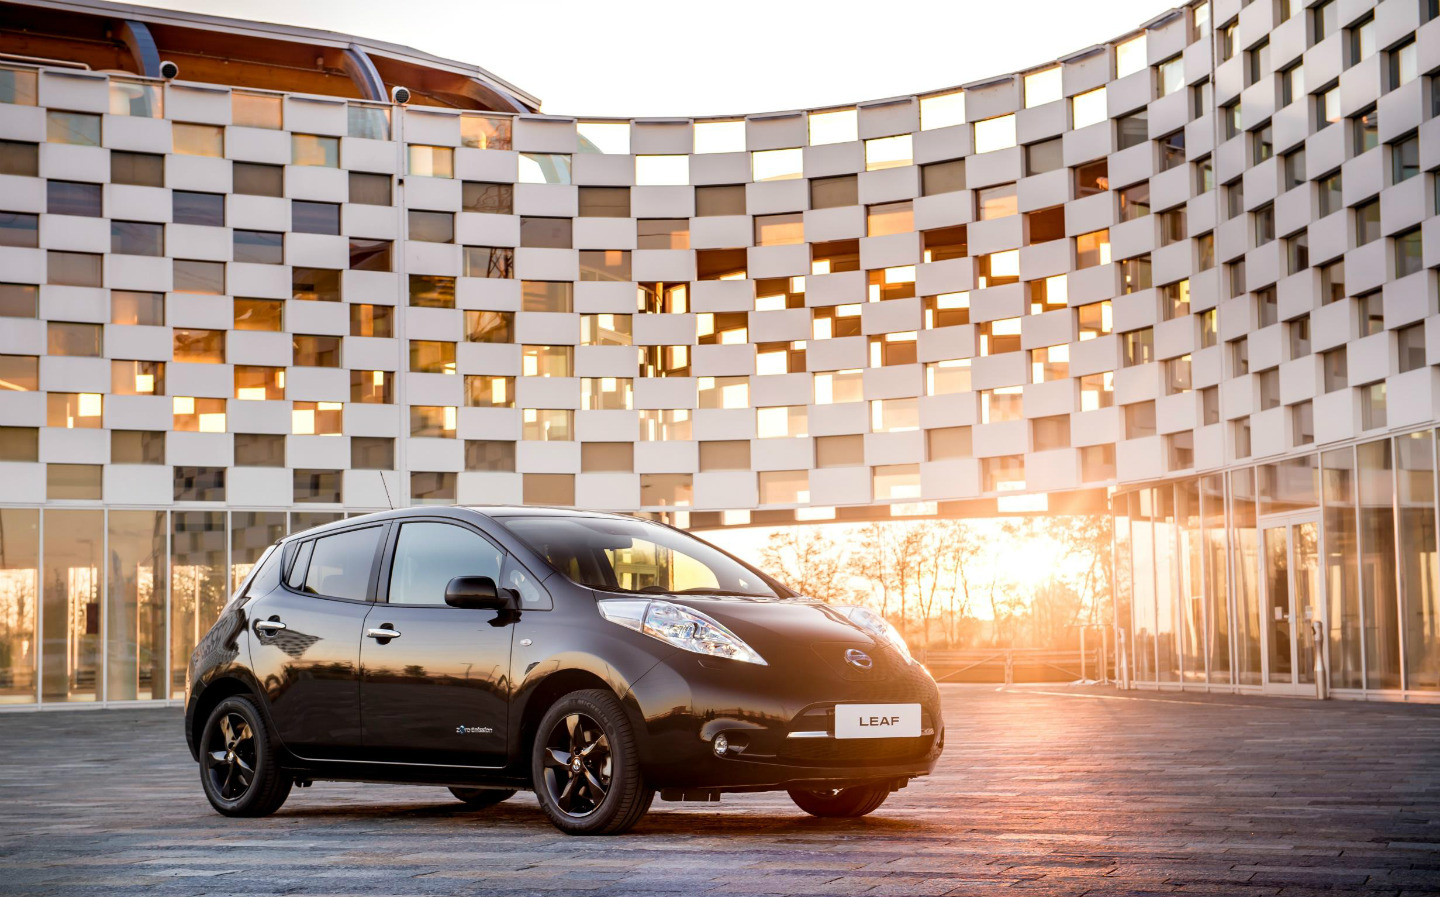 Nissan Leaf is one of the the best cars to avoid paying road tax (VED)